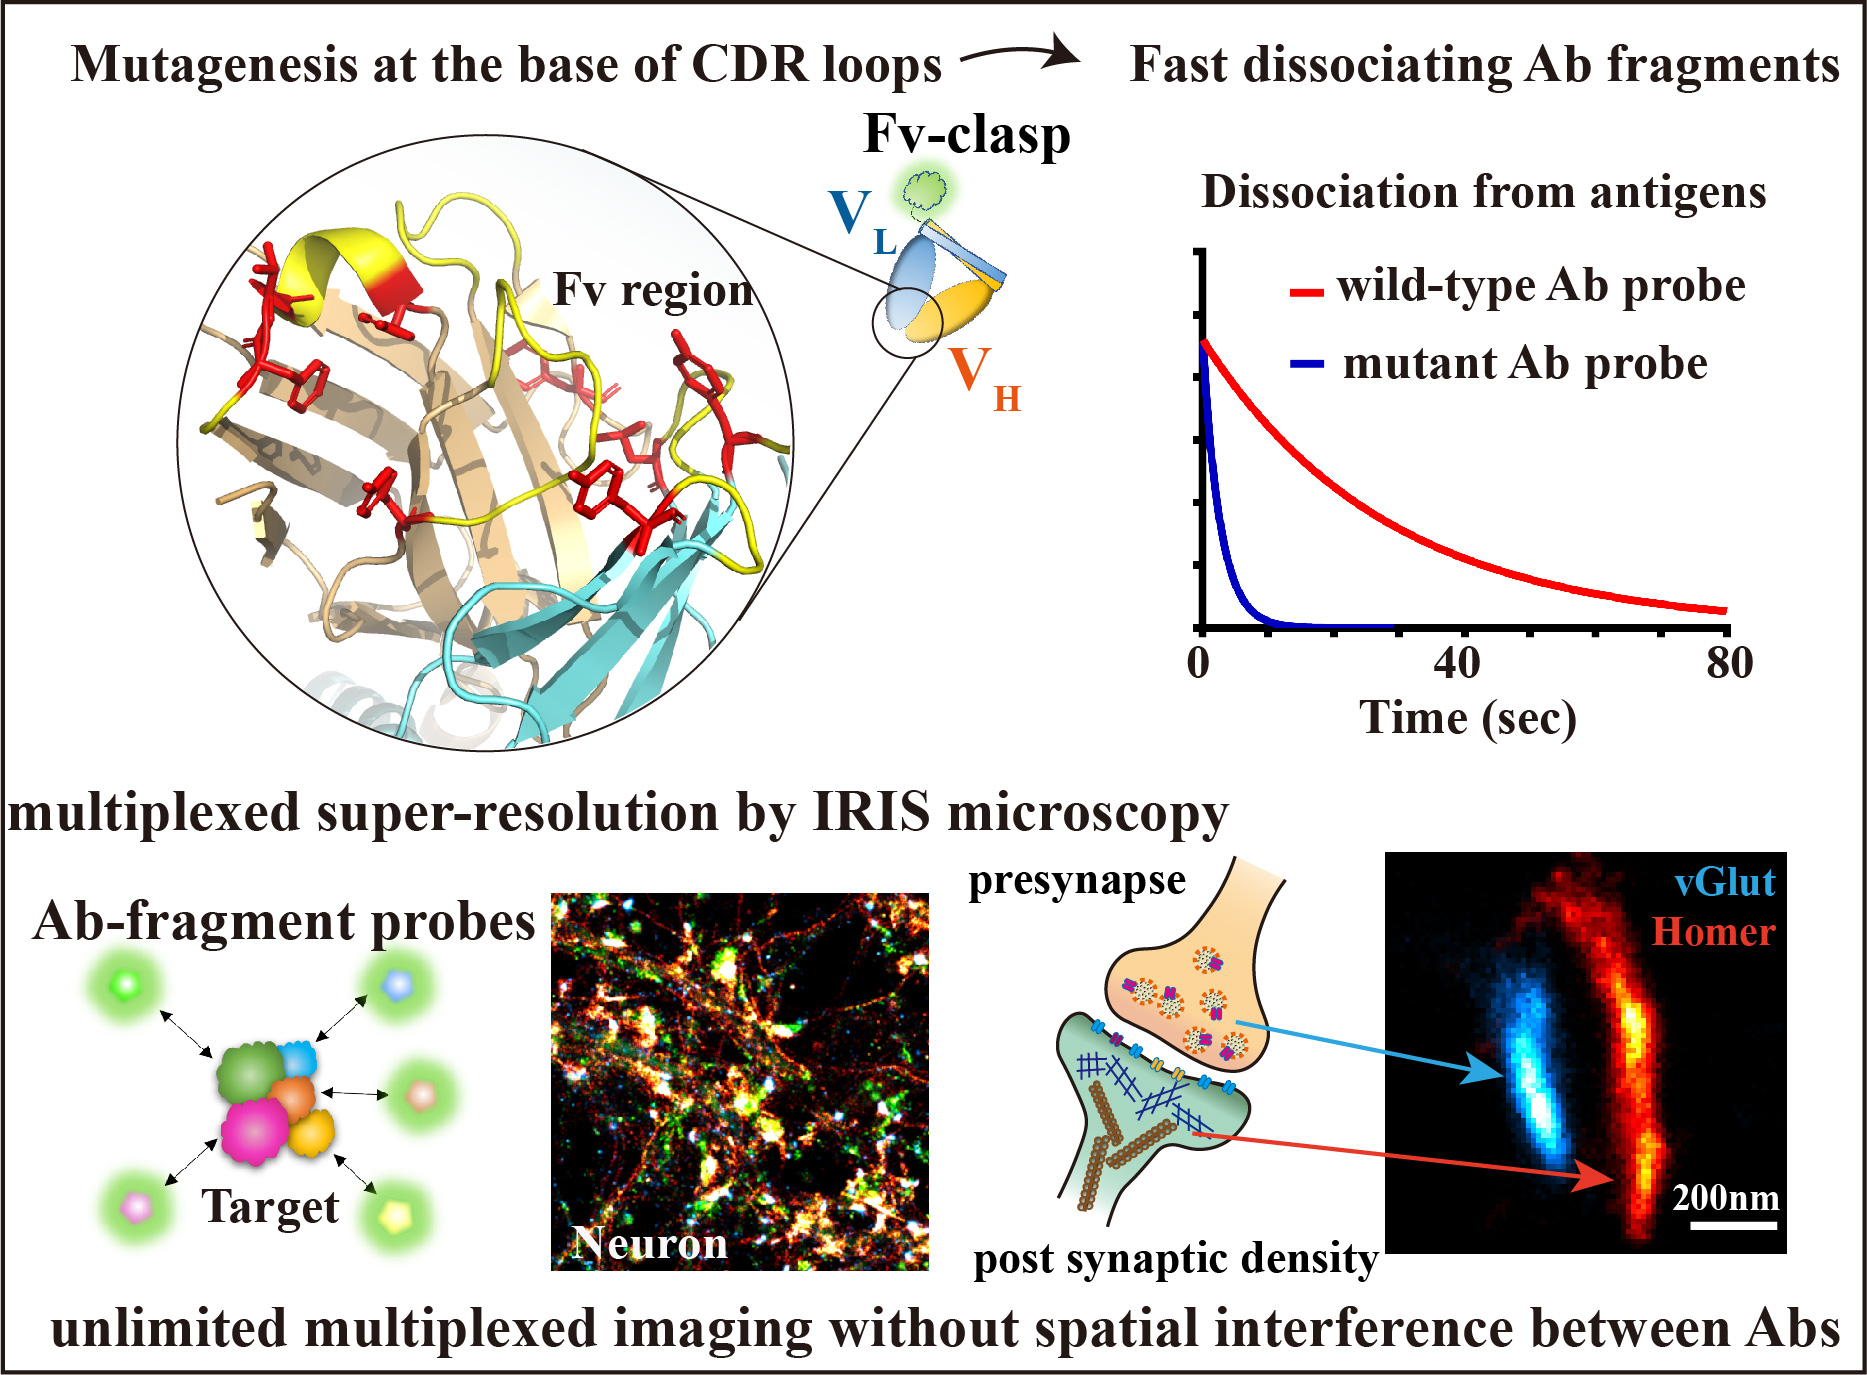 Innovative Technology Expands Applications of Monoclonal AntibodiesーRapid conversion of monoclonal antibodies to multiplexed super-resolution imaging probesー